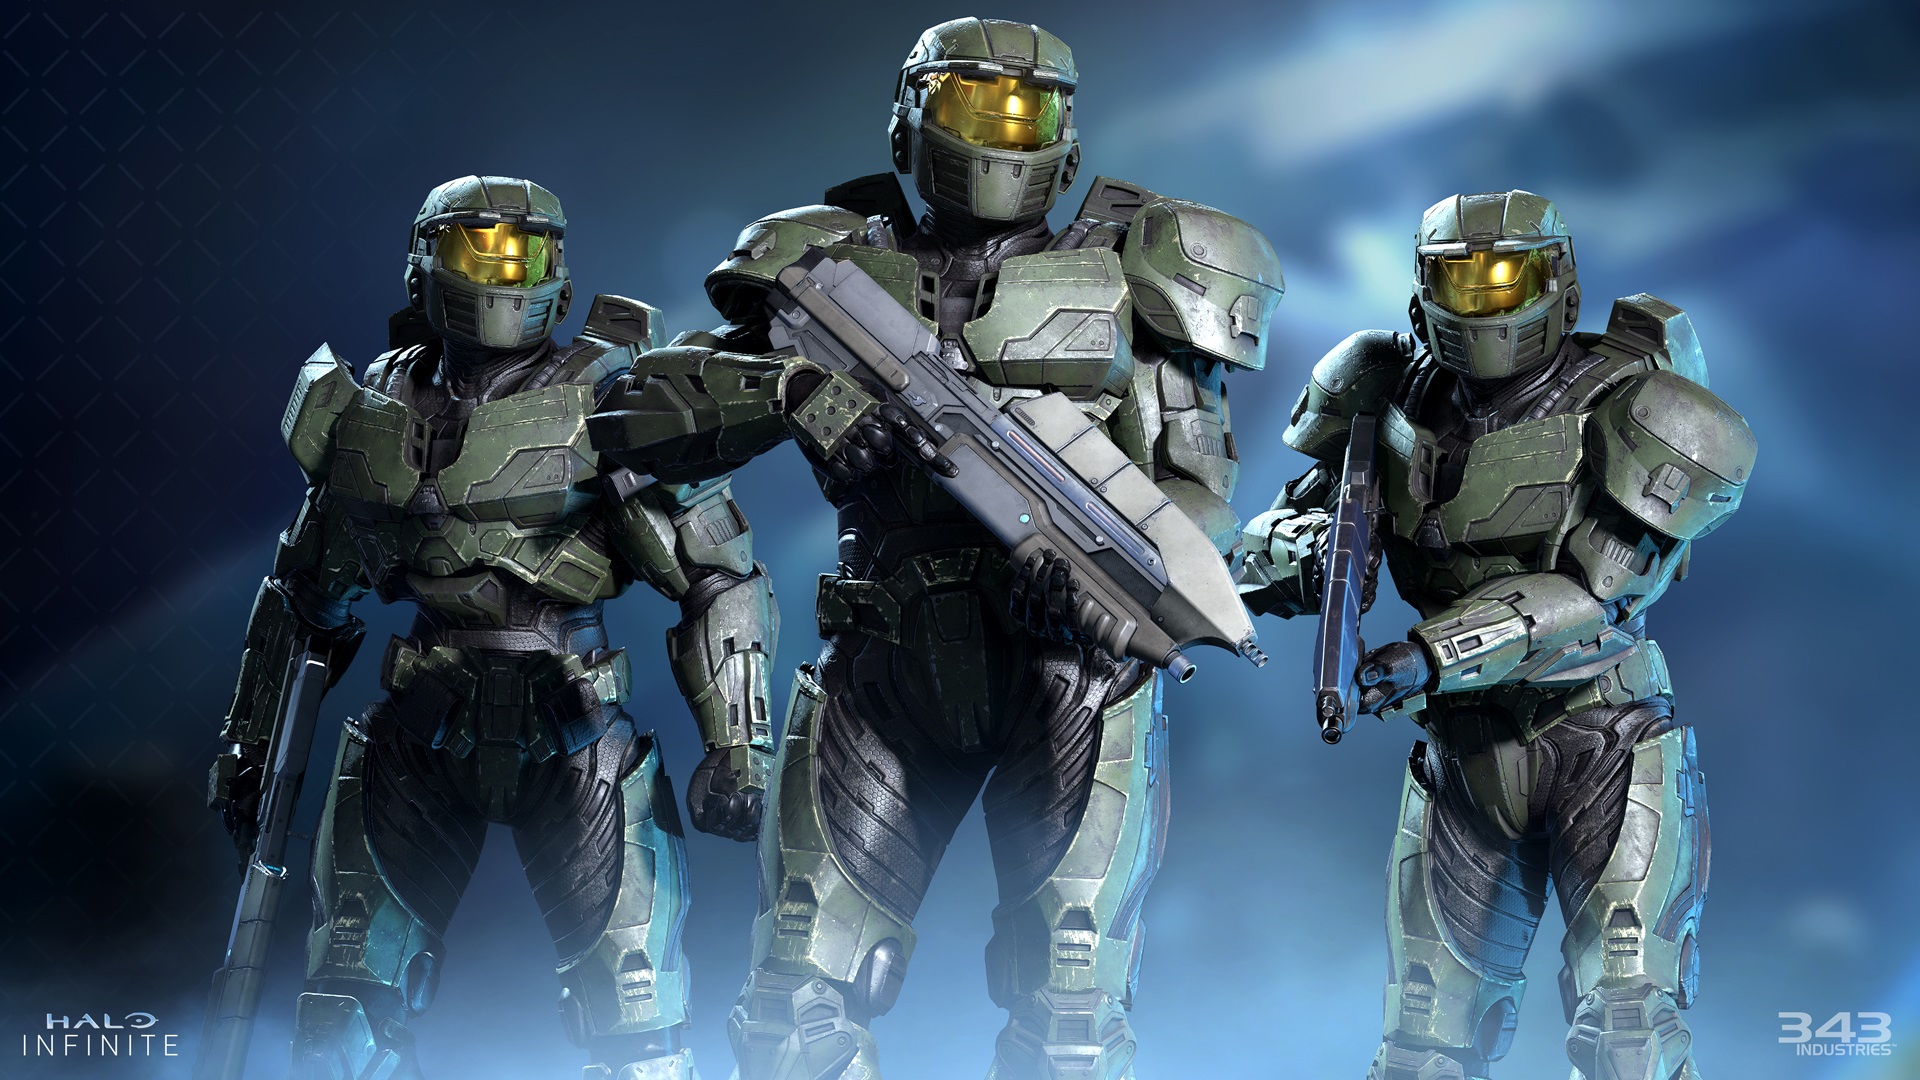 Halo Infinite image of three Spartans wearing Mark IV armor